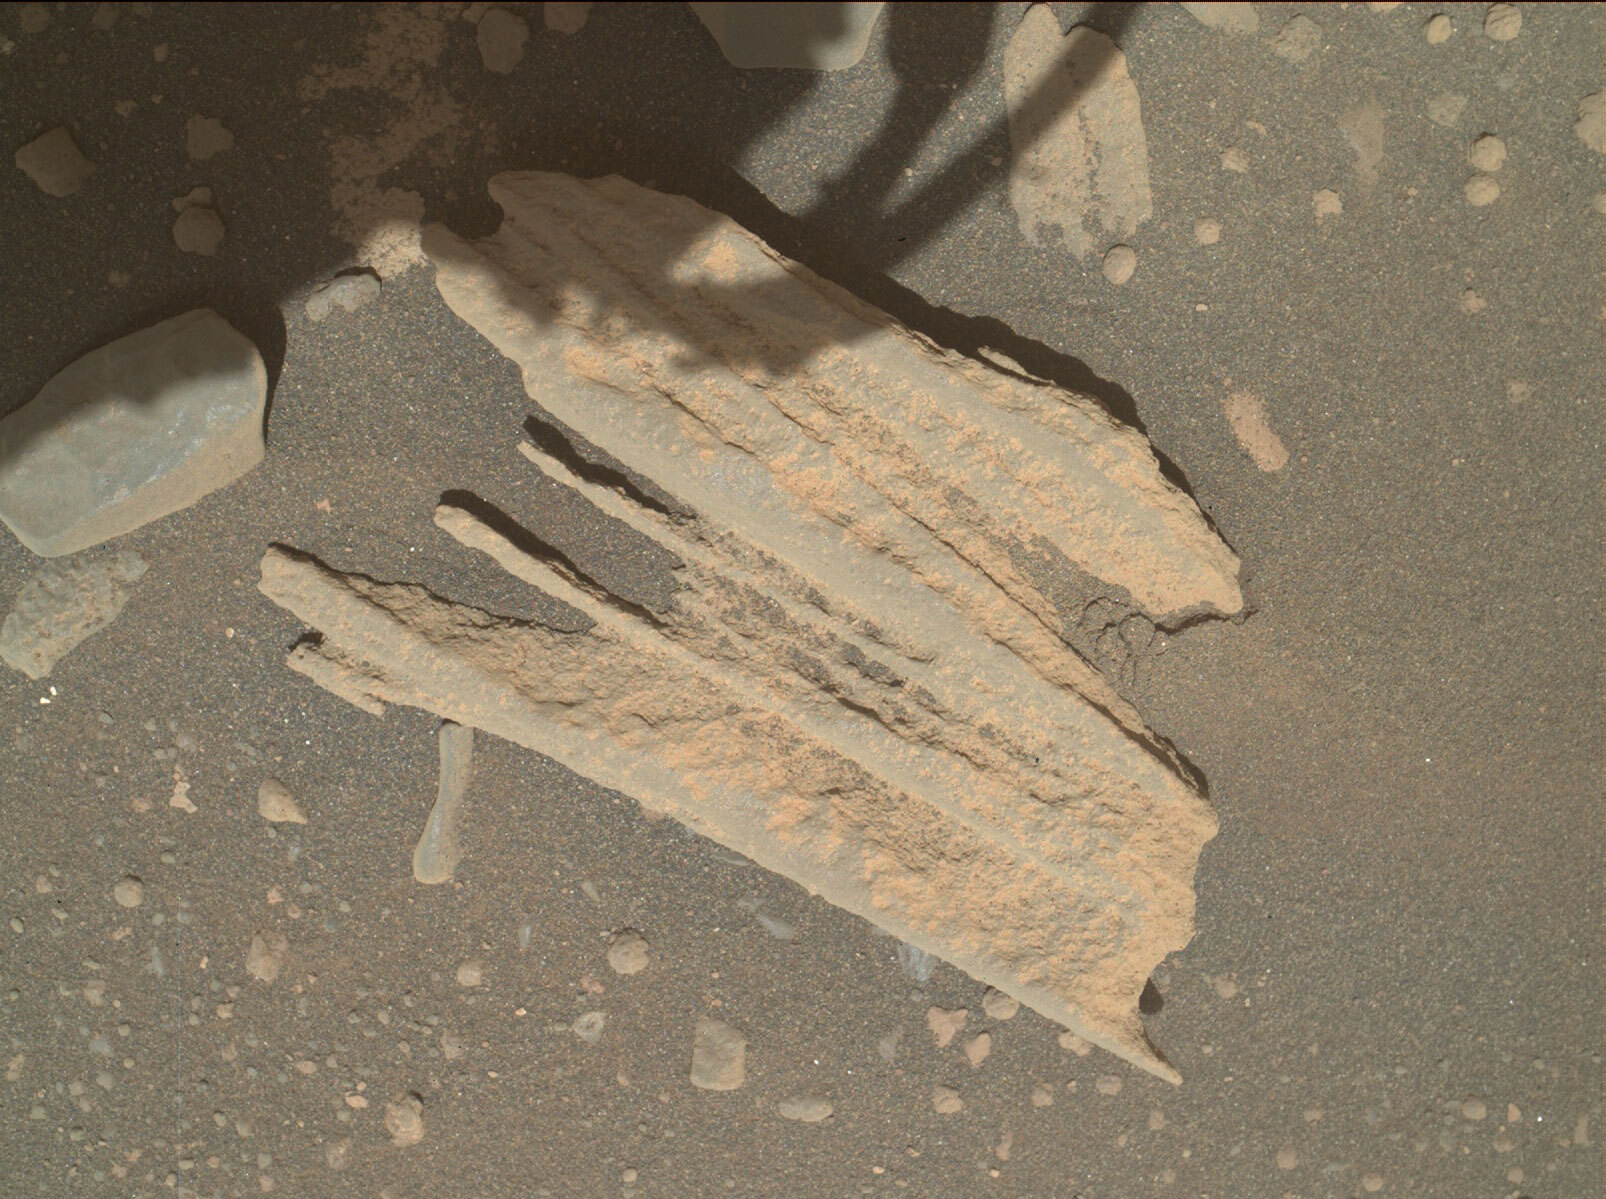 MAHLI image of the layered float rock, "Camusnagaul" APXS target taken from ~5 cm standoff on Sol 3313.